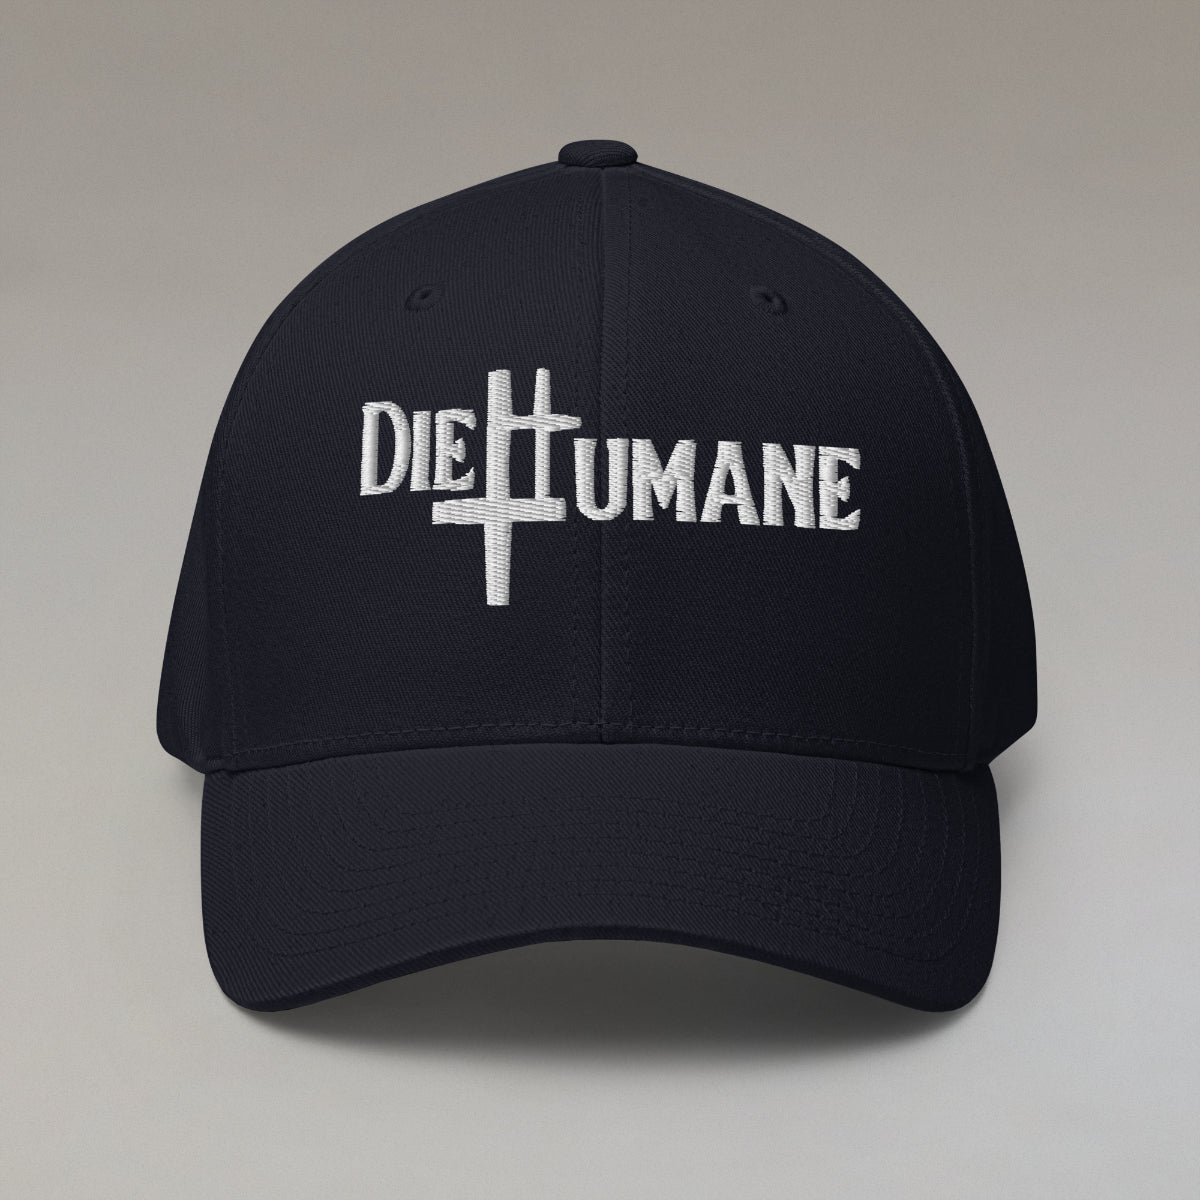 DieHumane hat. Navy baseball cap with white stitching, embroidery